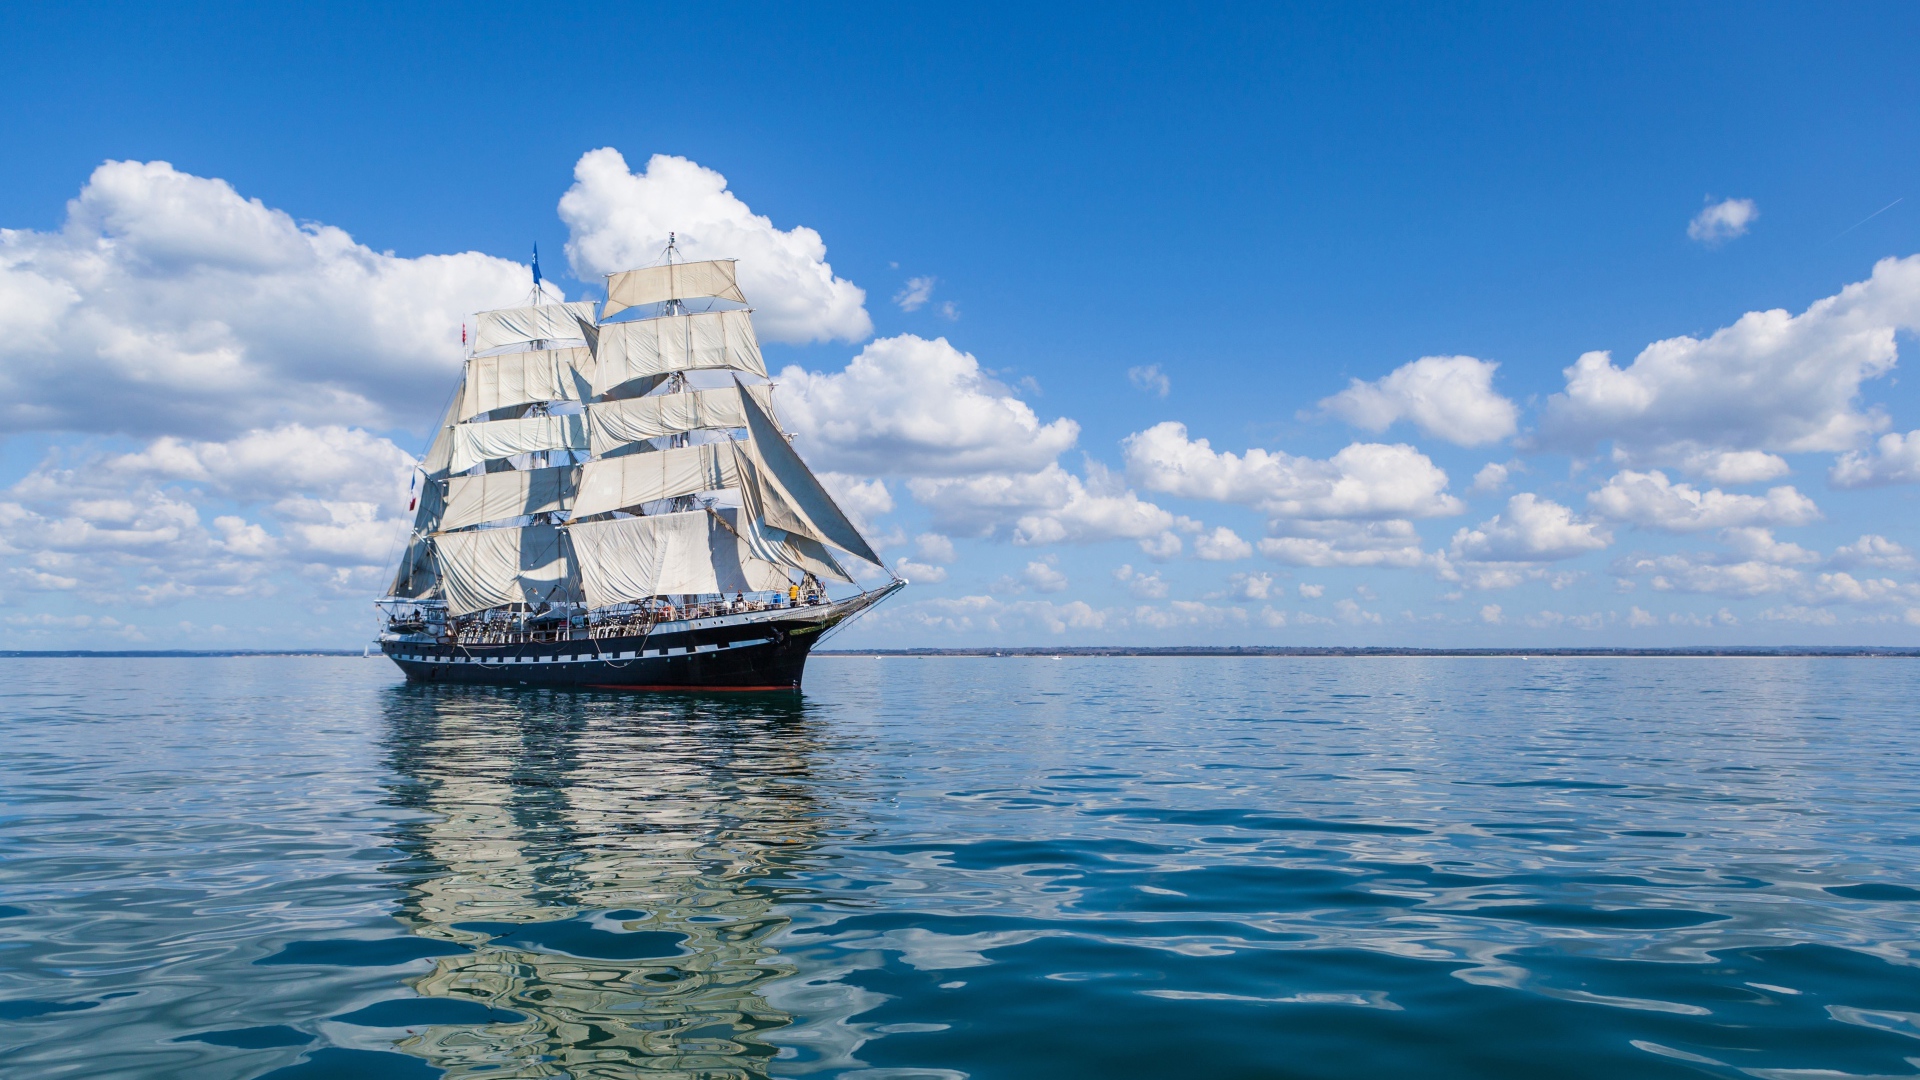 Big ship with white sails at sea under blue sky